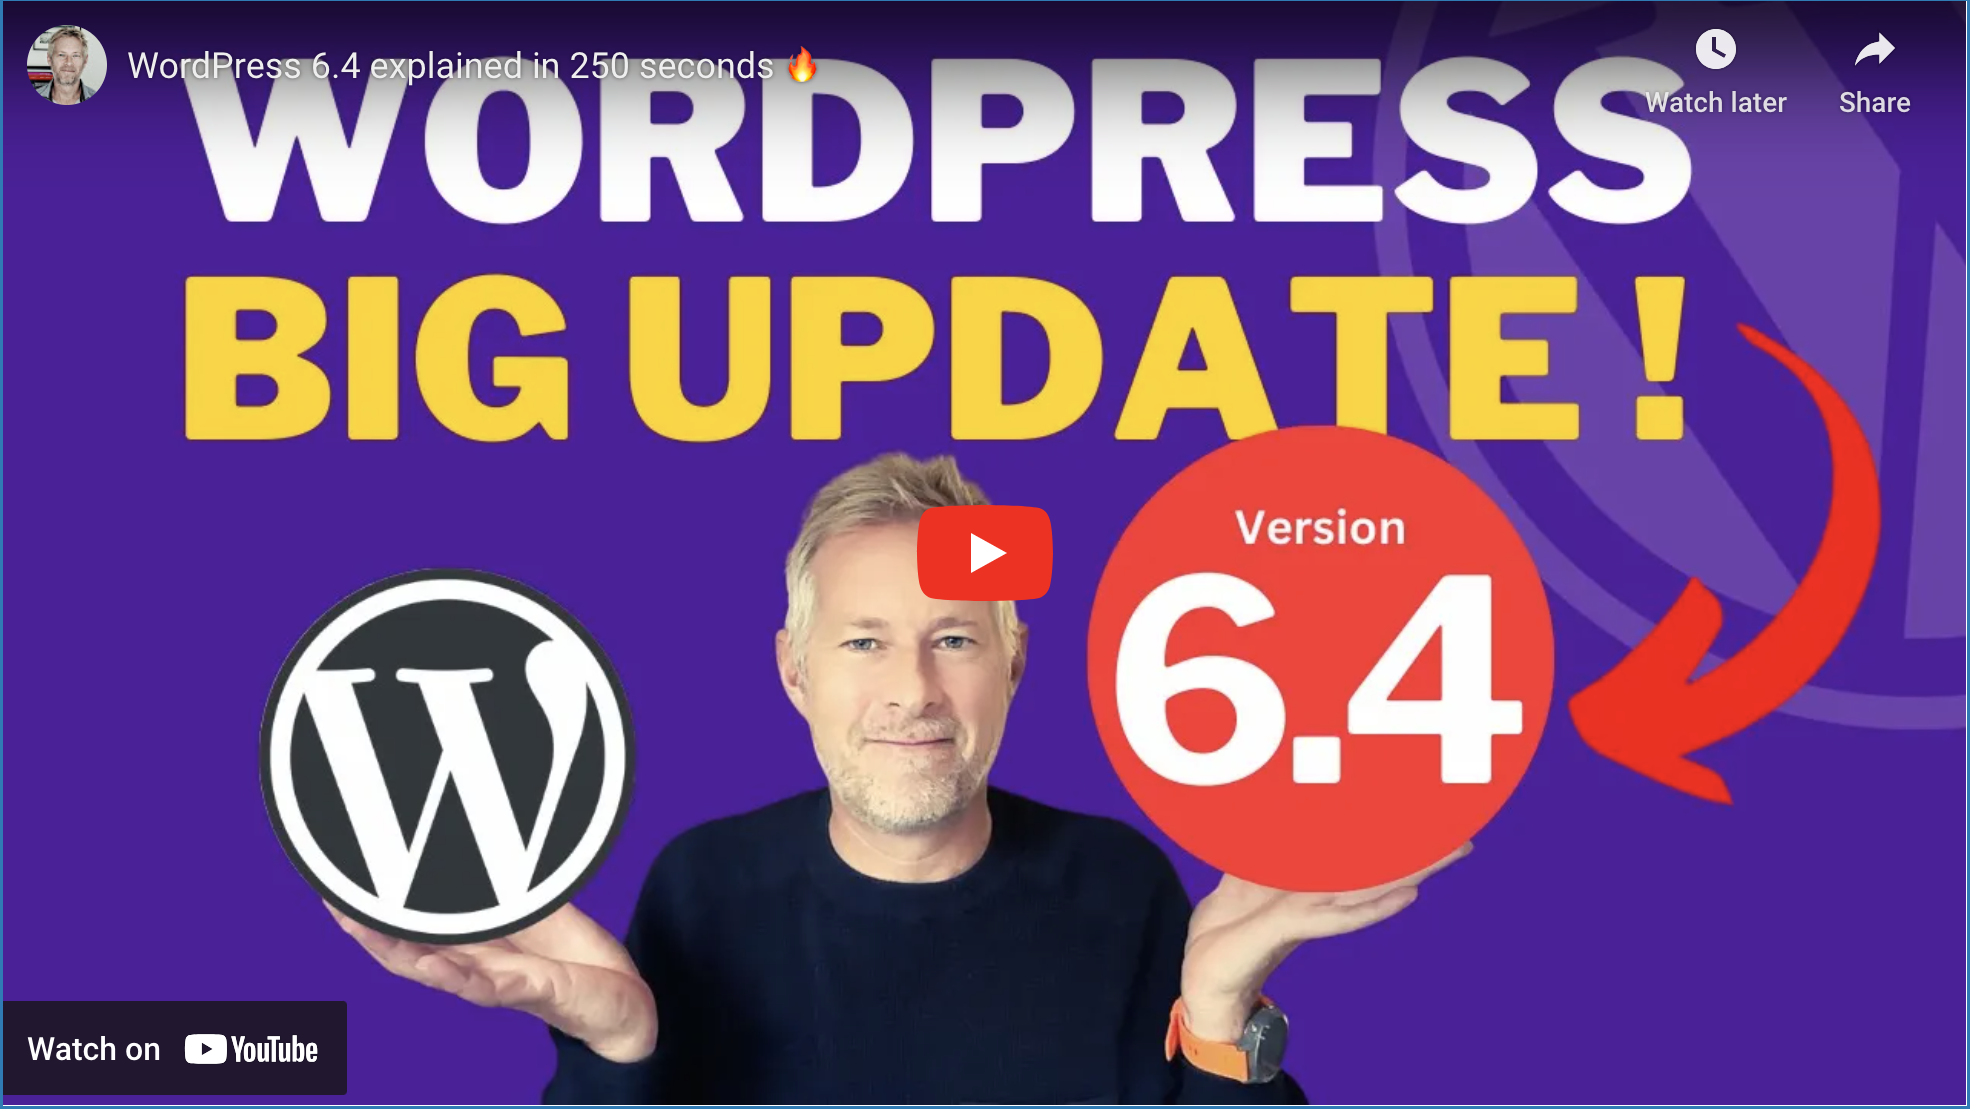 WordPress 6.4 explained in 250 seconds